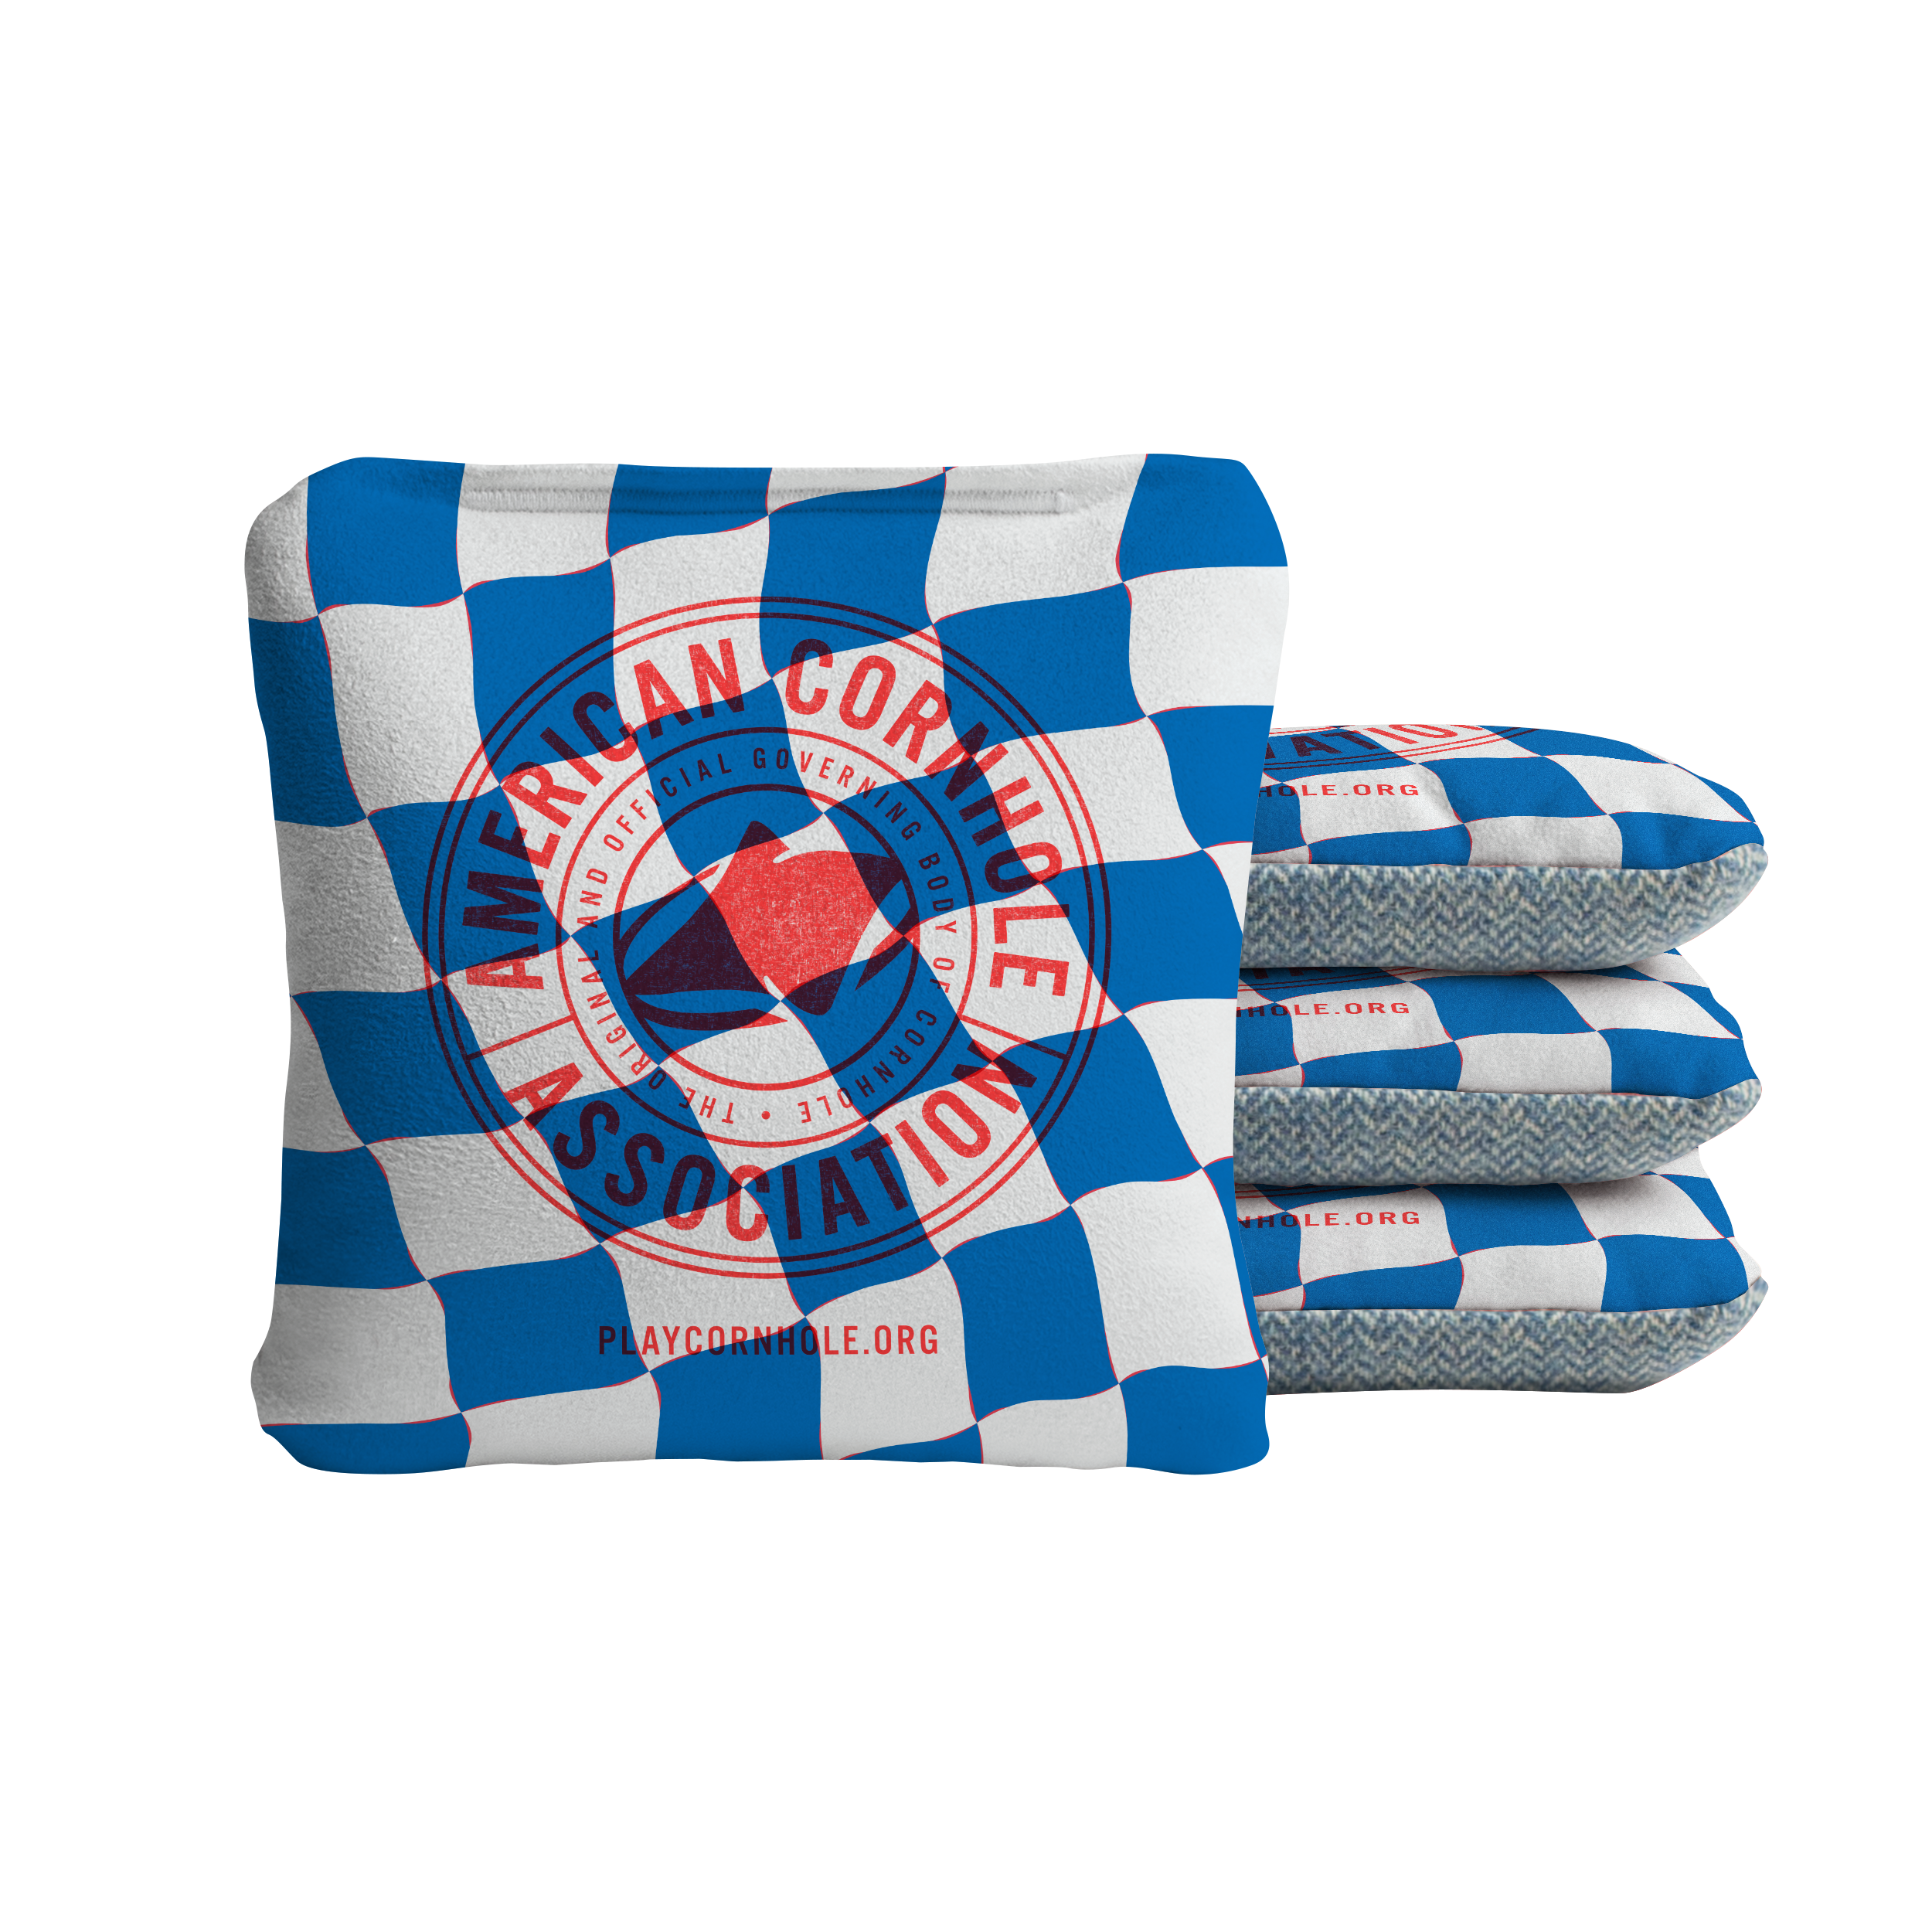 6-in Synergy Soft ACA Checkered Flag Professional Regulation Cornhole Bags